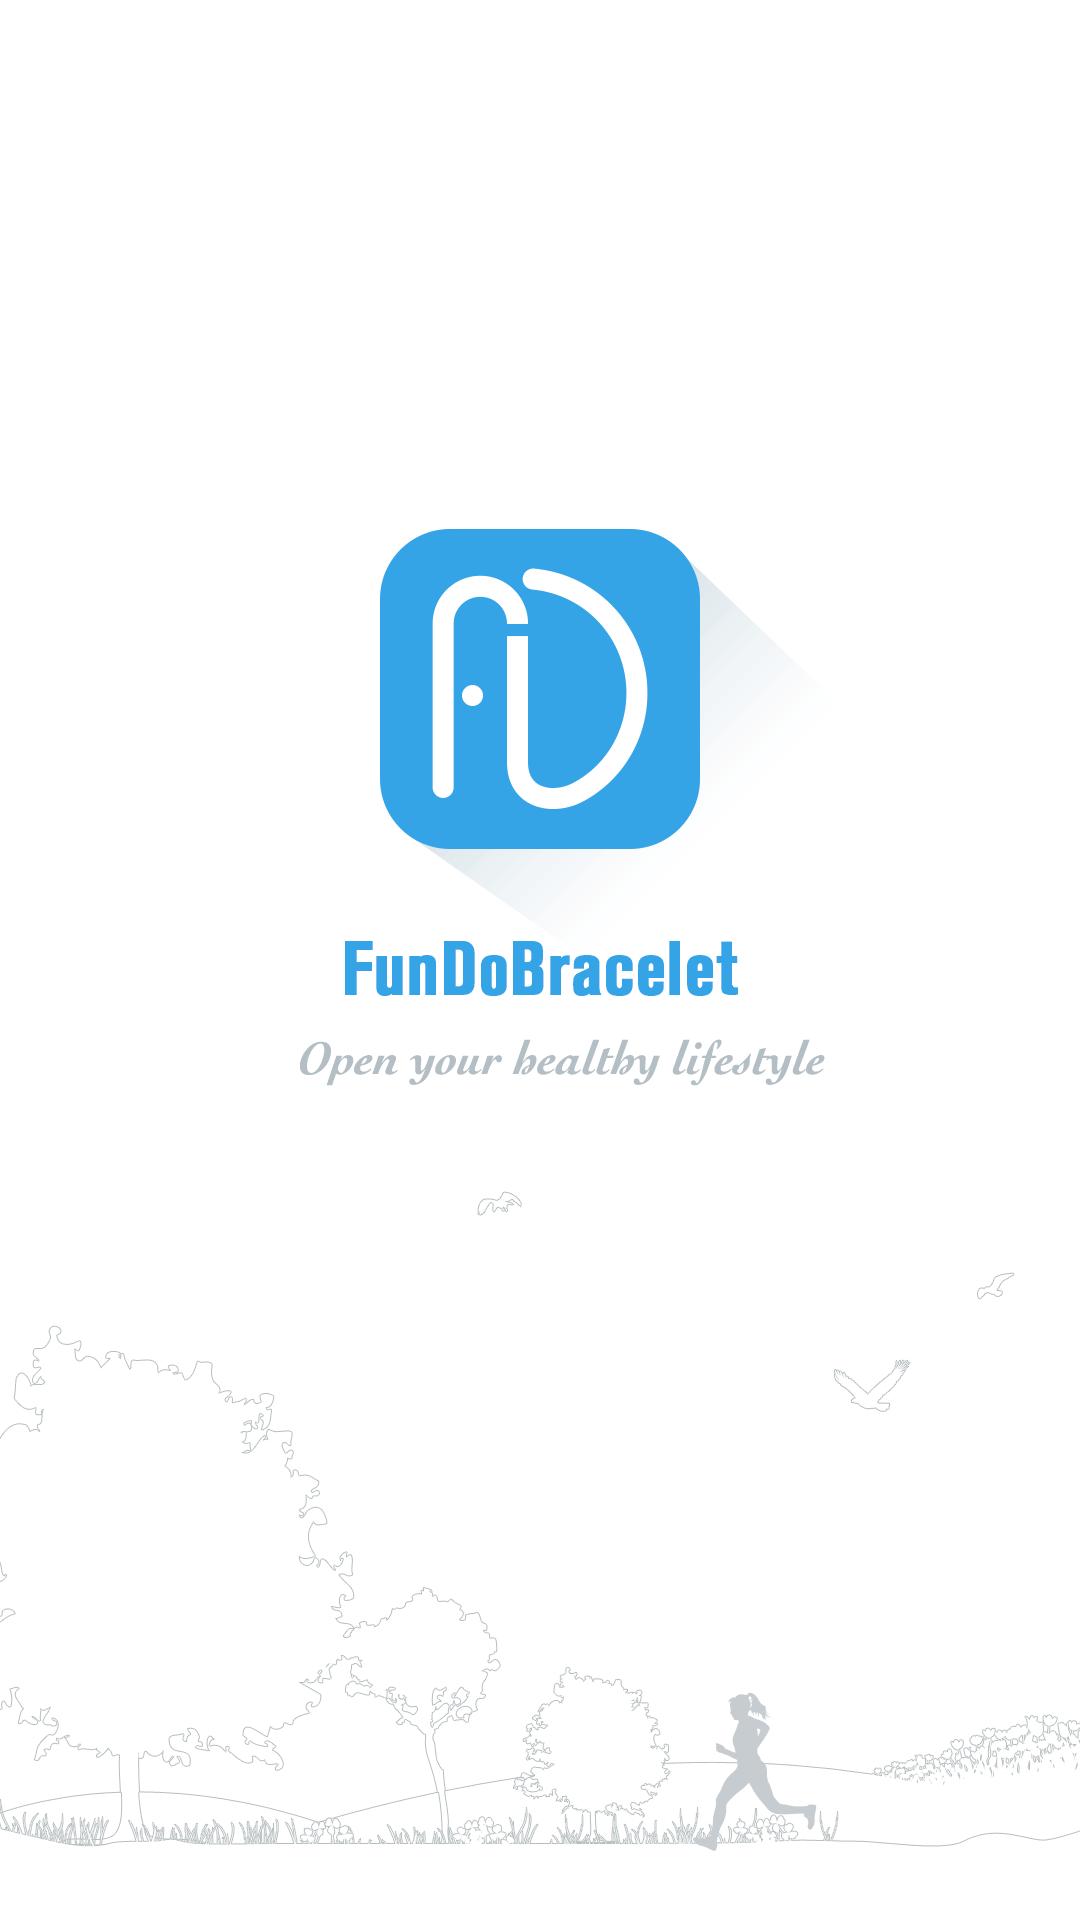 Fundo Bracelet for Android - APK Download